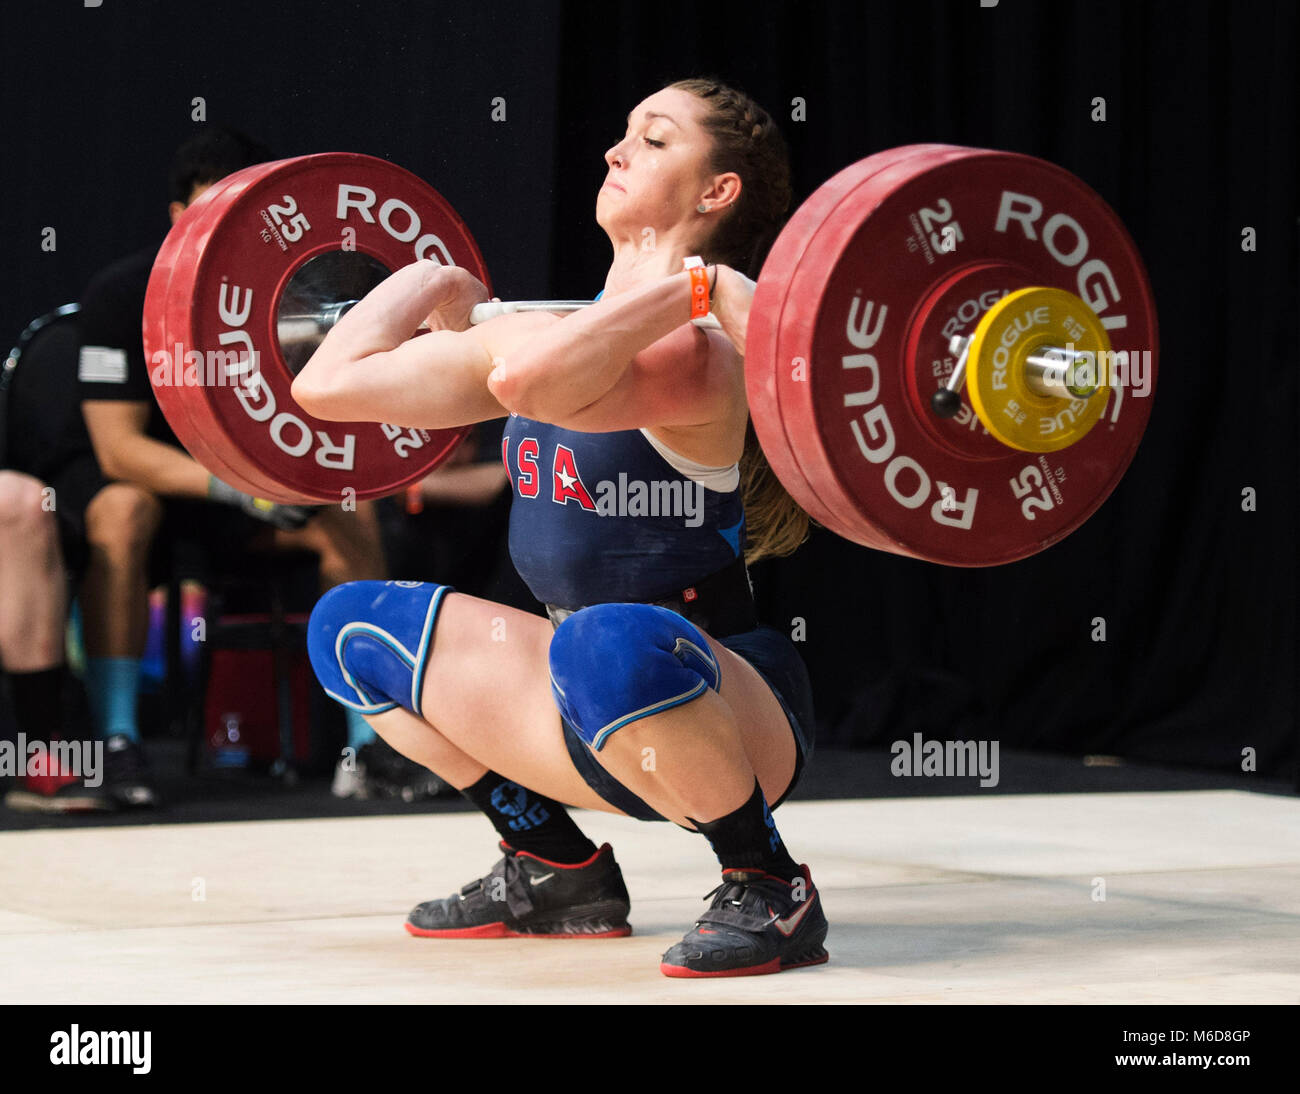 Columbus, Ohio, USA. 2 March, 2018. Mattie Rogers competes in the clean and jerk at the Arnold Sports Festival in Columbus, Ohio, USA. Brent Clark/Alamy Live  News Stock Photo